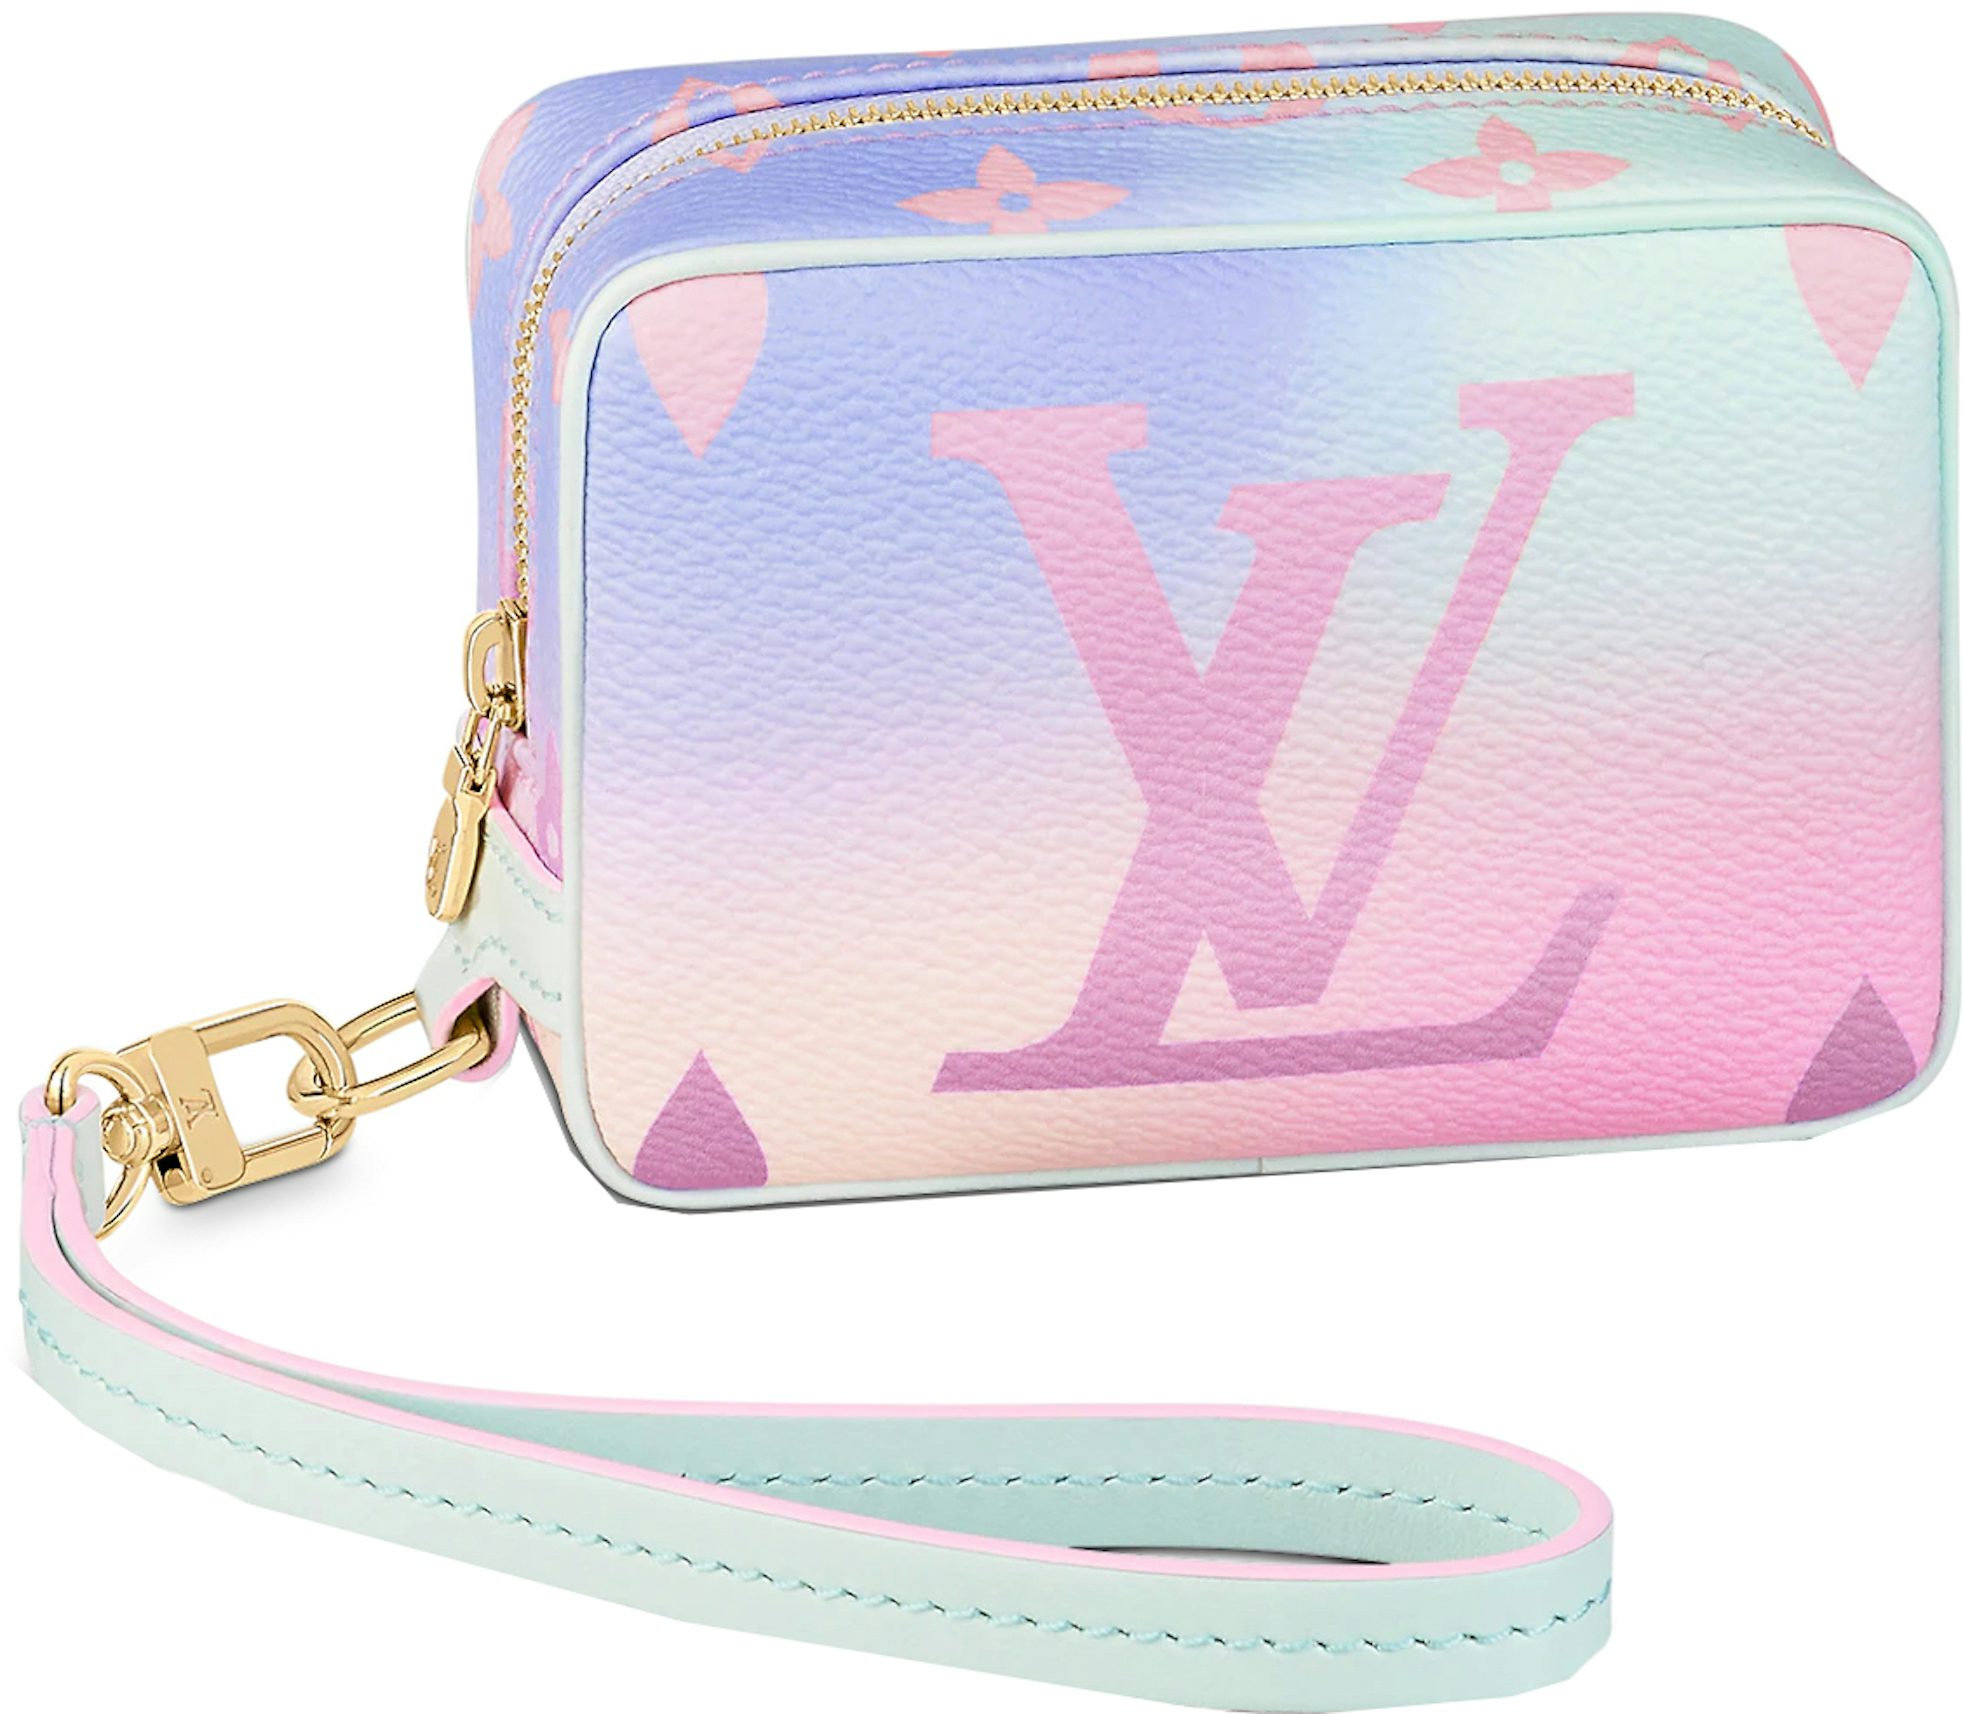 Louis Vuitton Wapity Case Sunrise Pastel in Coated Canvas/Leather